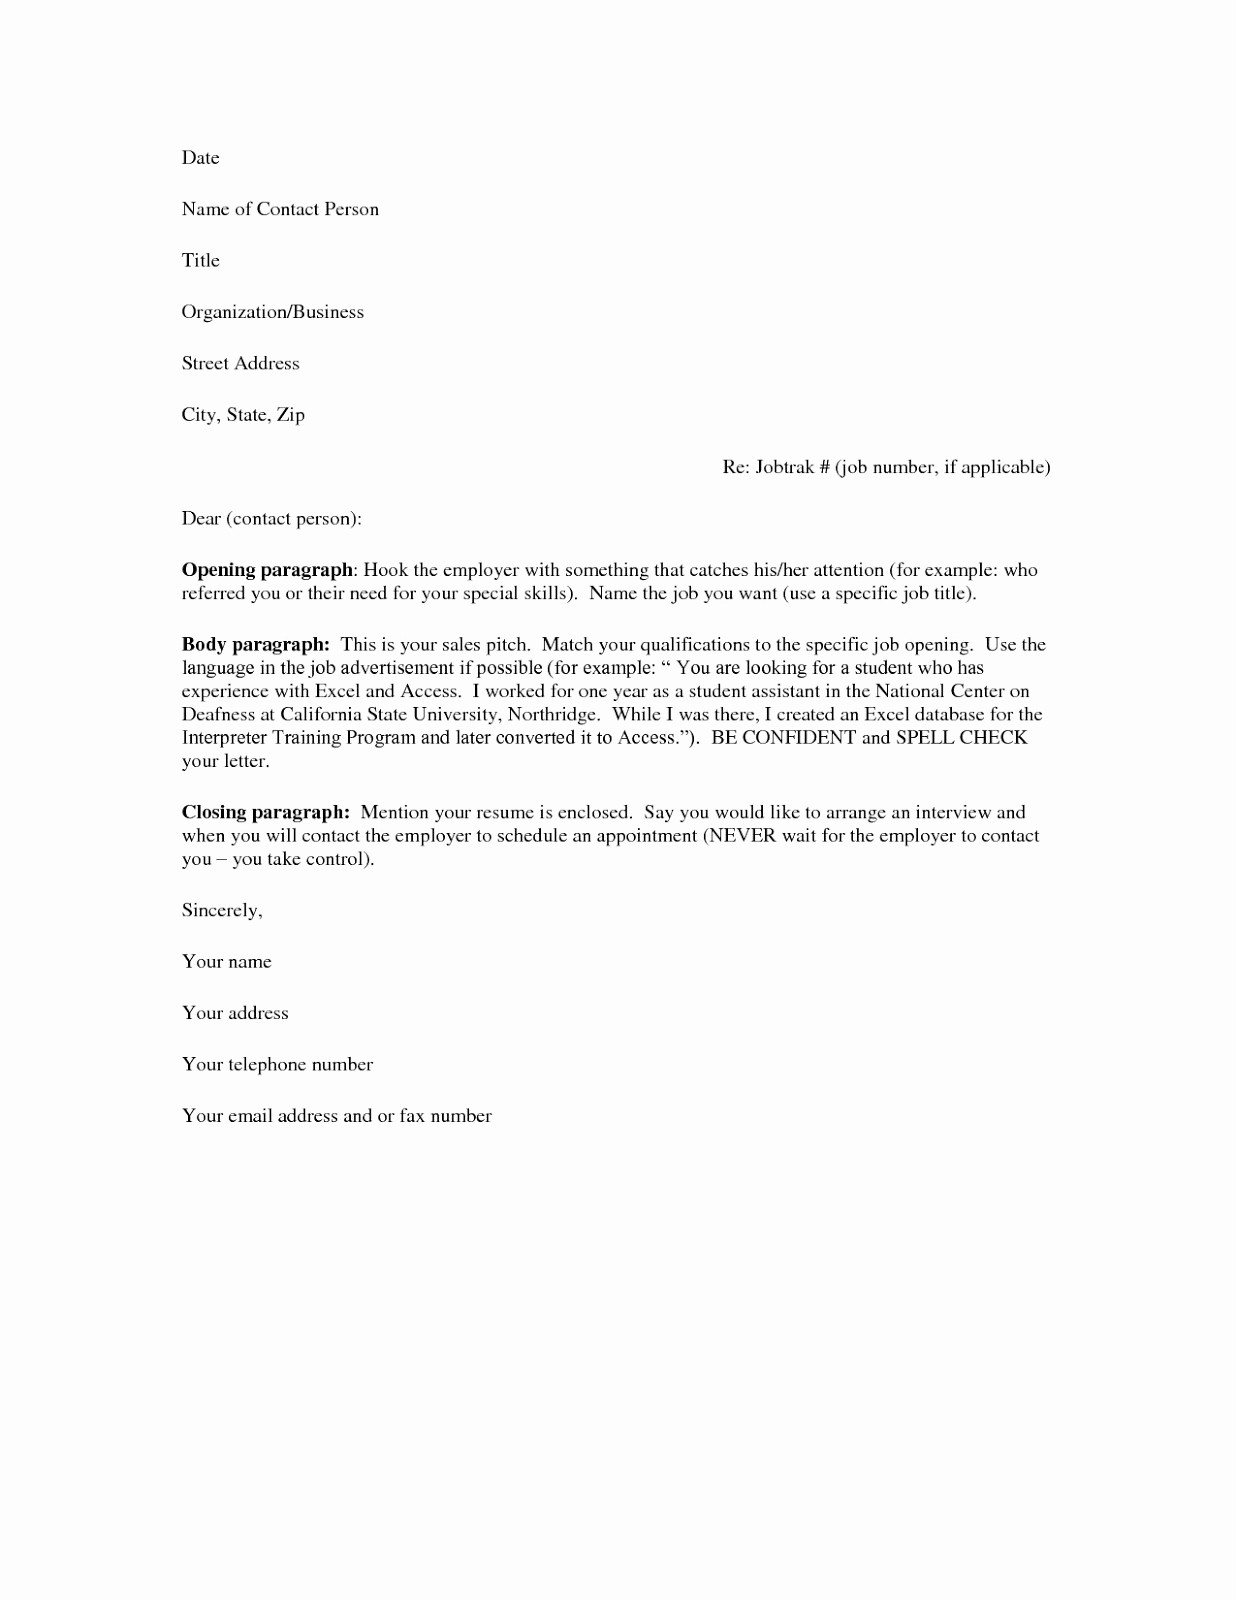 Free Cover Letter for Resume Beautiful Free Cover Letter Samples for Resumes